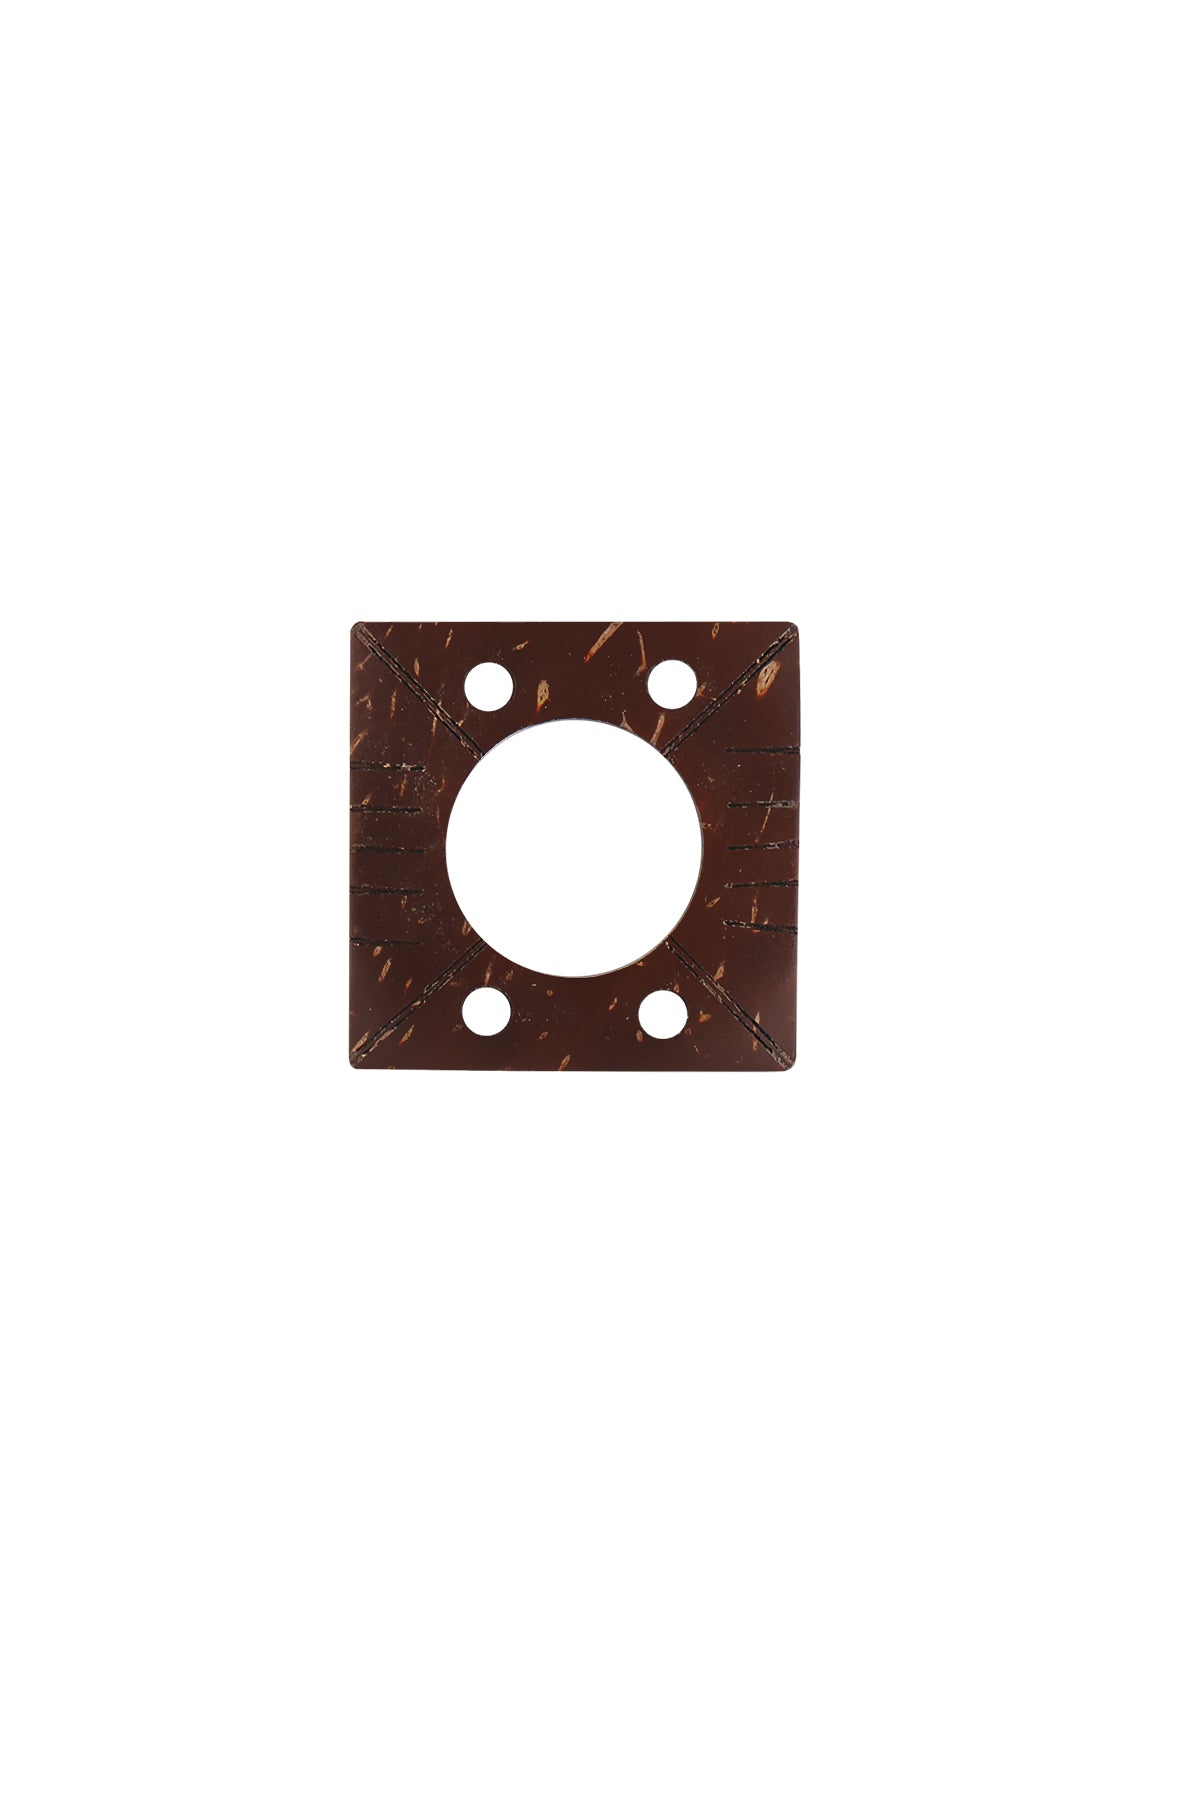 Square Shape 4-Hole Brown Ring Decorative Coco Buttons